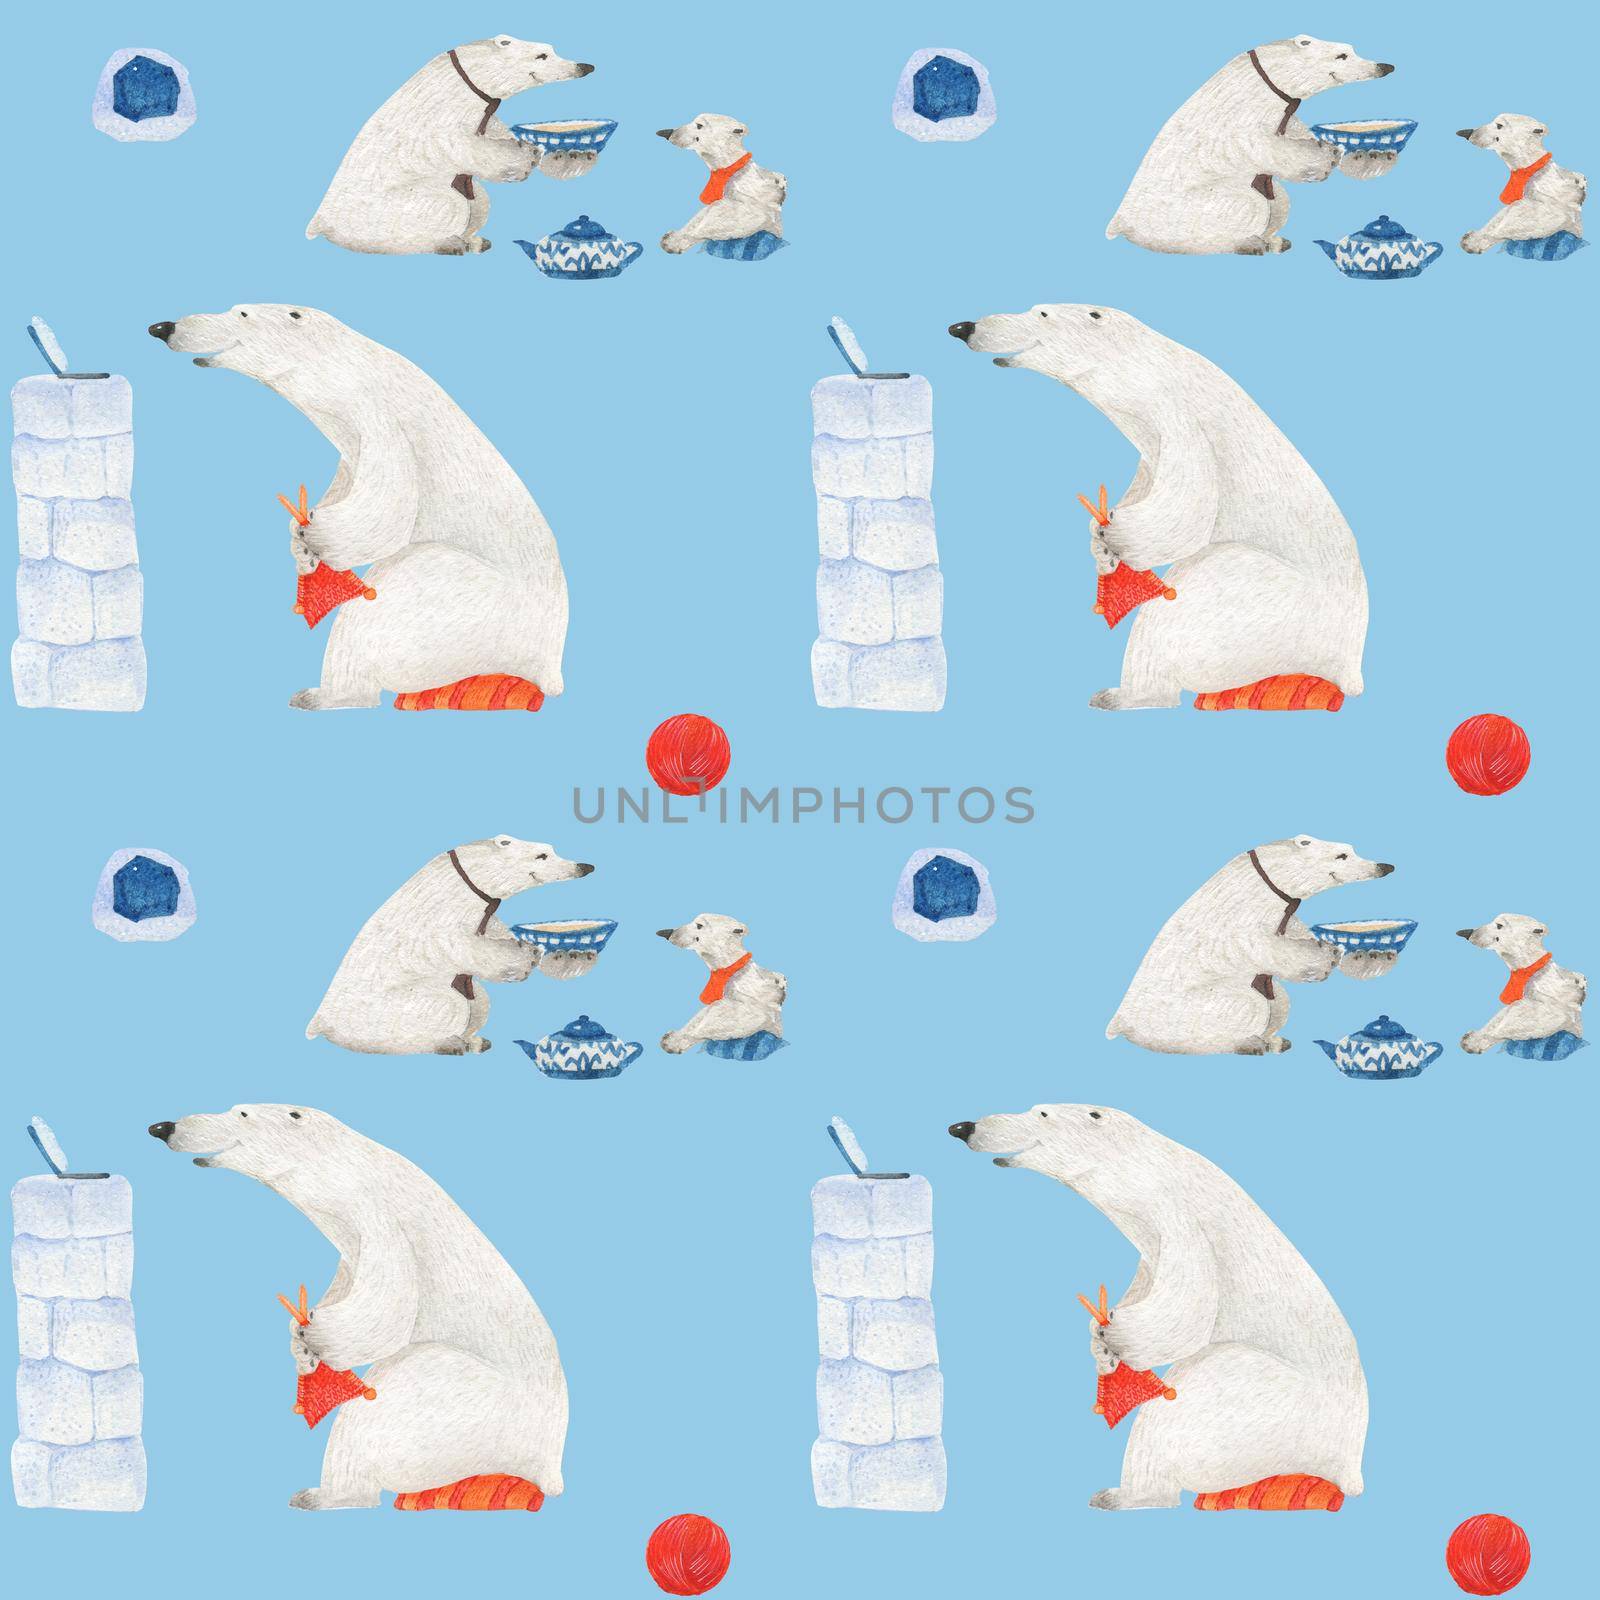 Polar bears drink tea and knitting. Watercolor seamless patterns for textile, wrapping paper and any tiled design. Bluebackground, clipping path uncluded